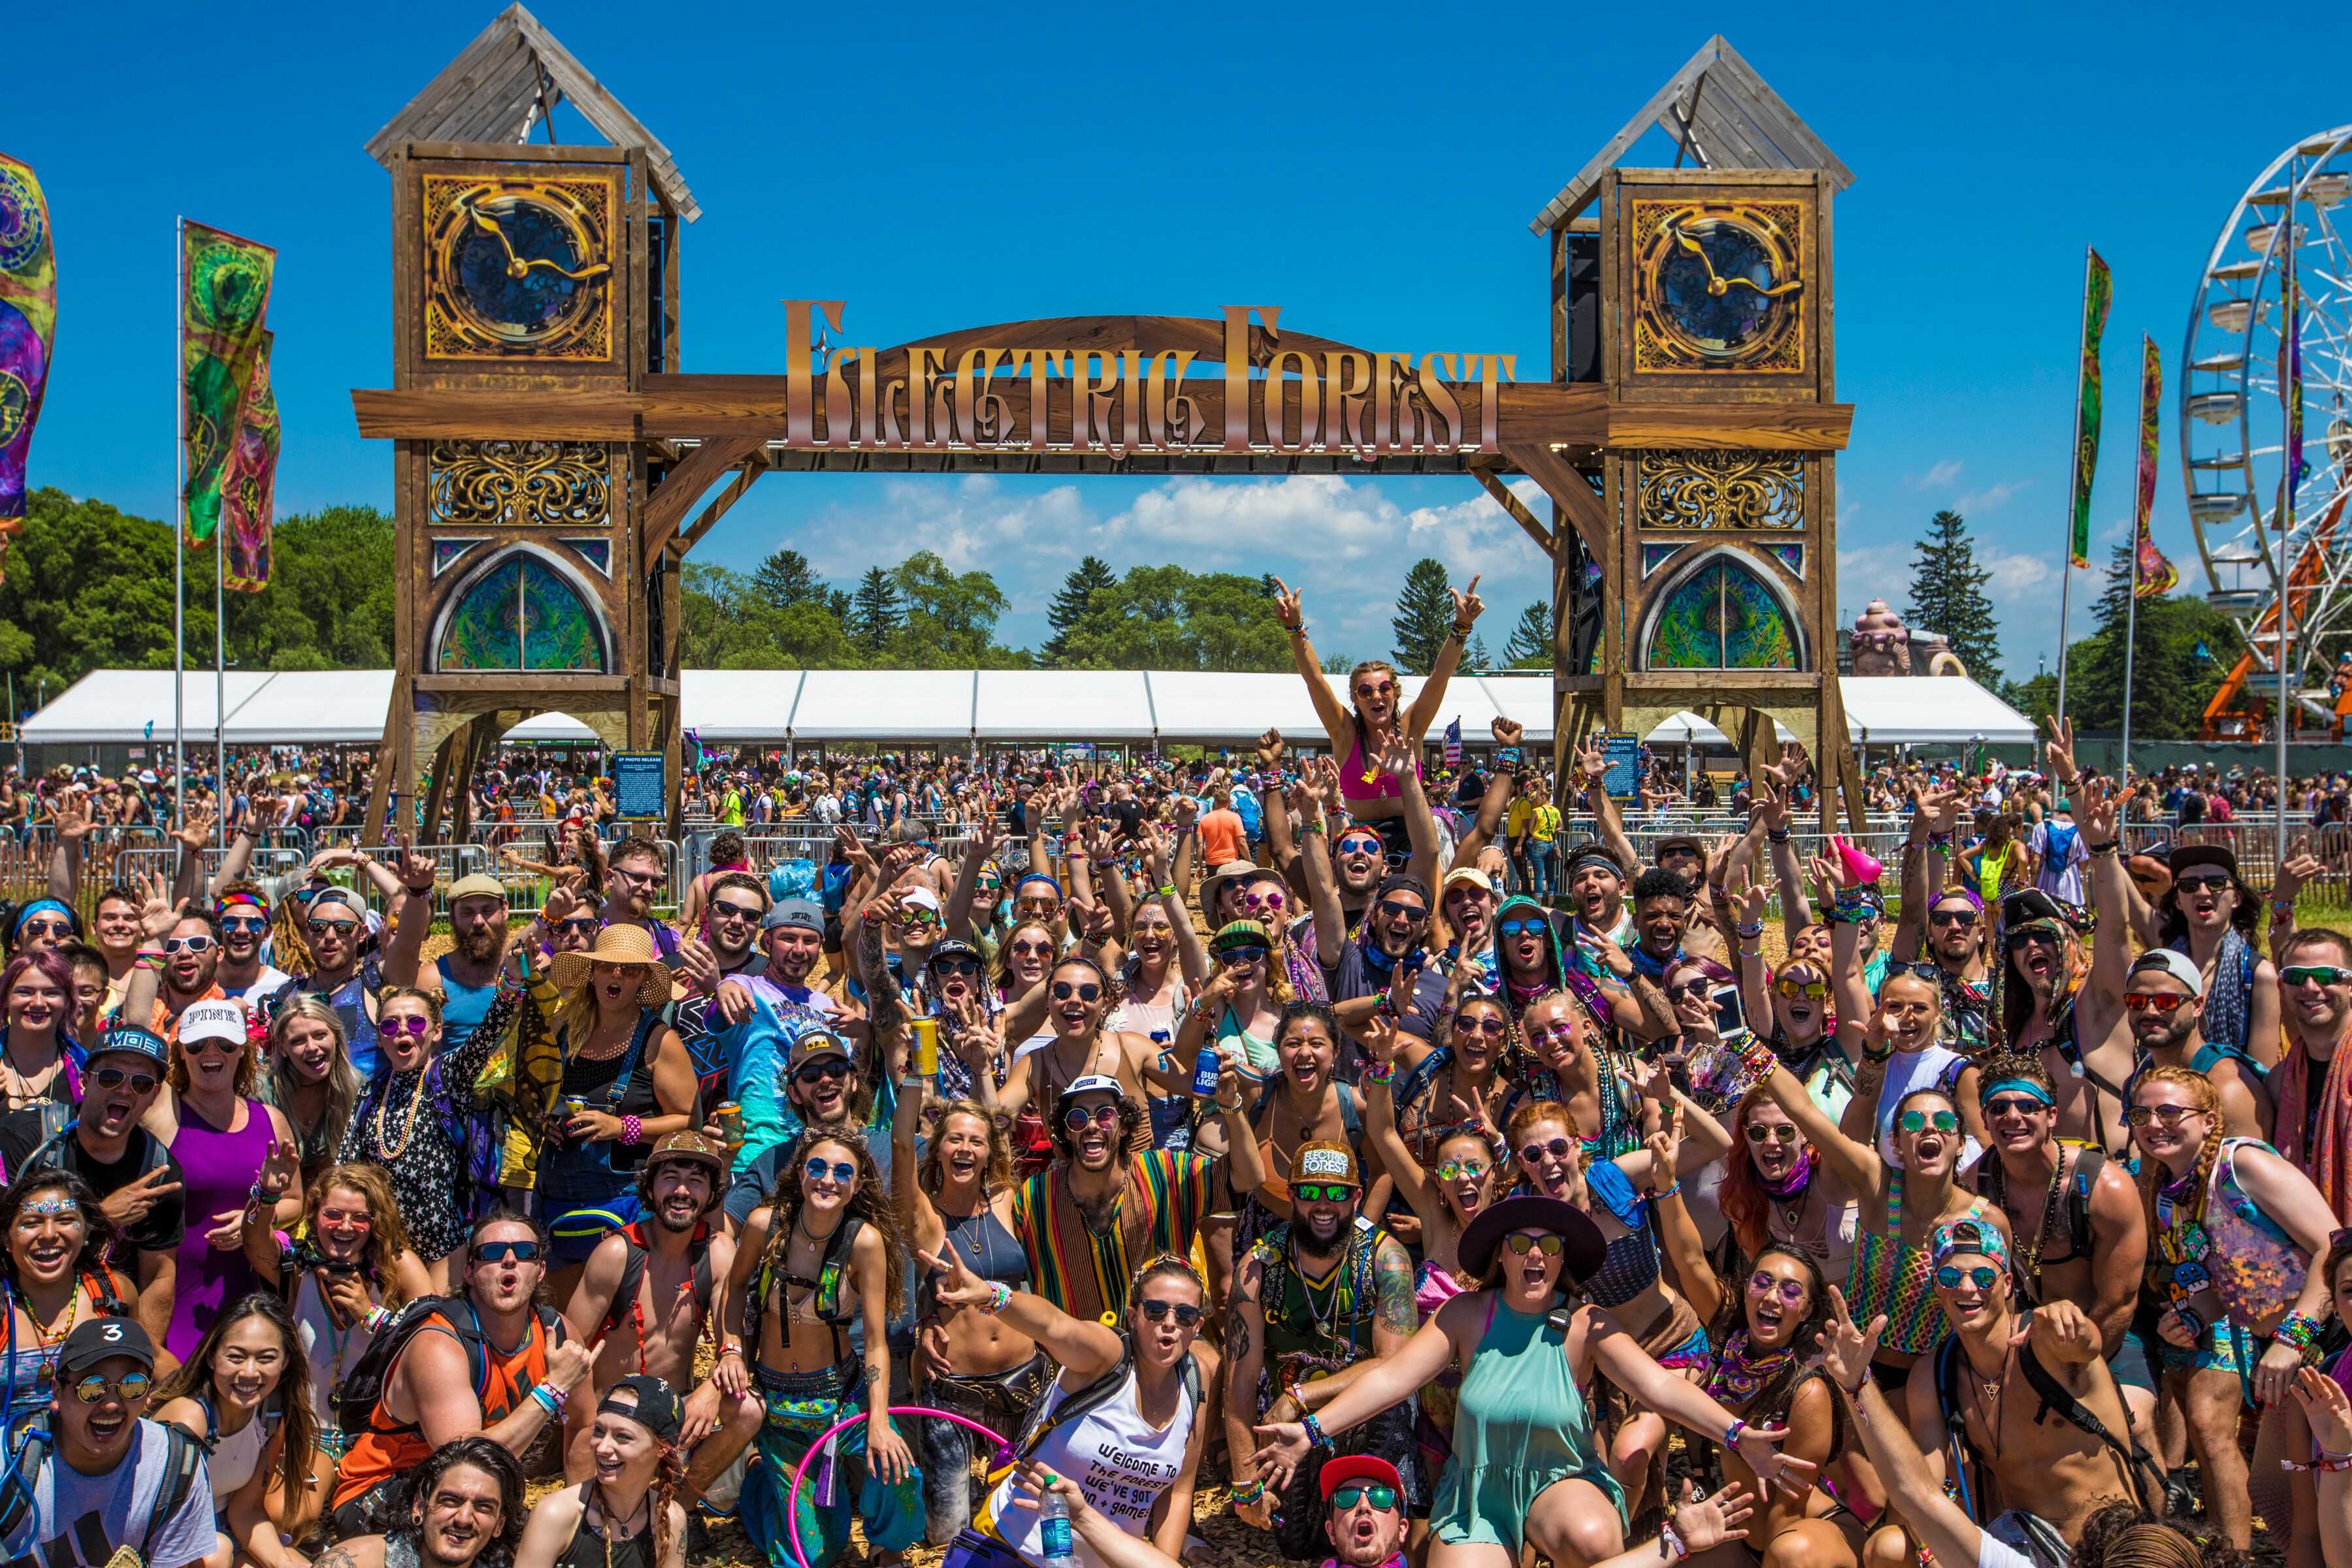 Electric Forest Festival hitlist Know before you go · The Badger Herald